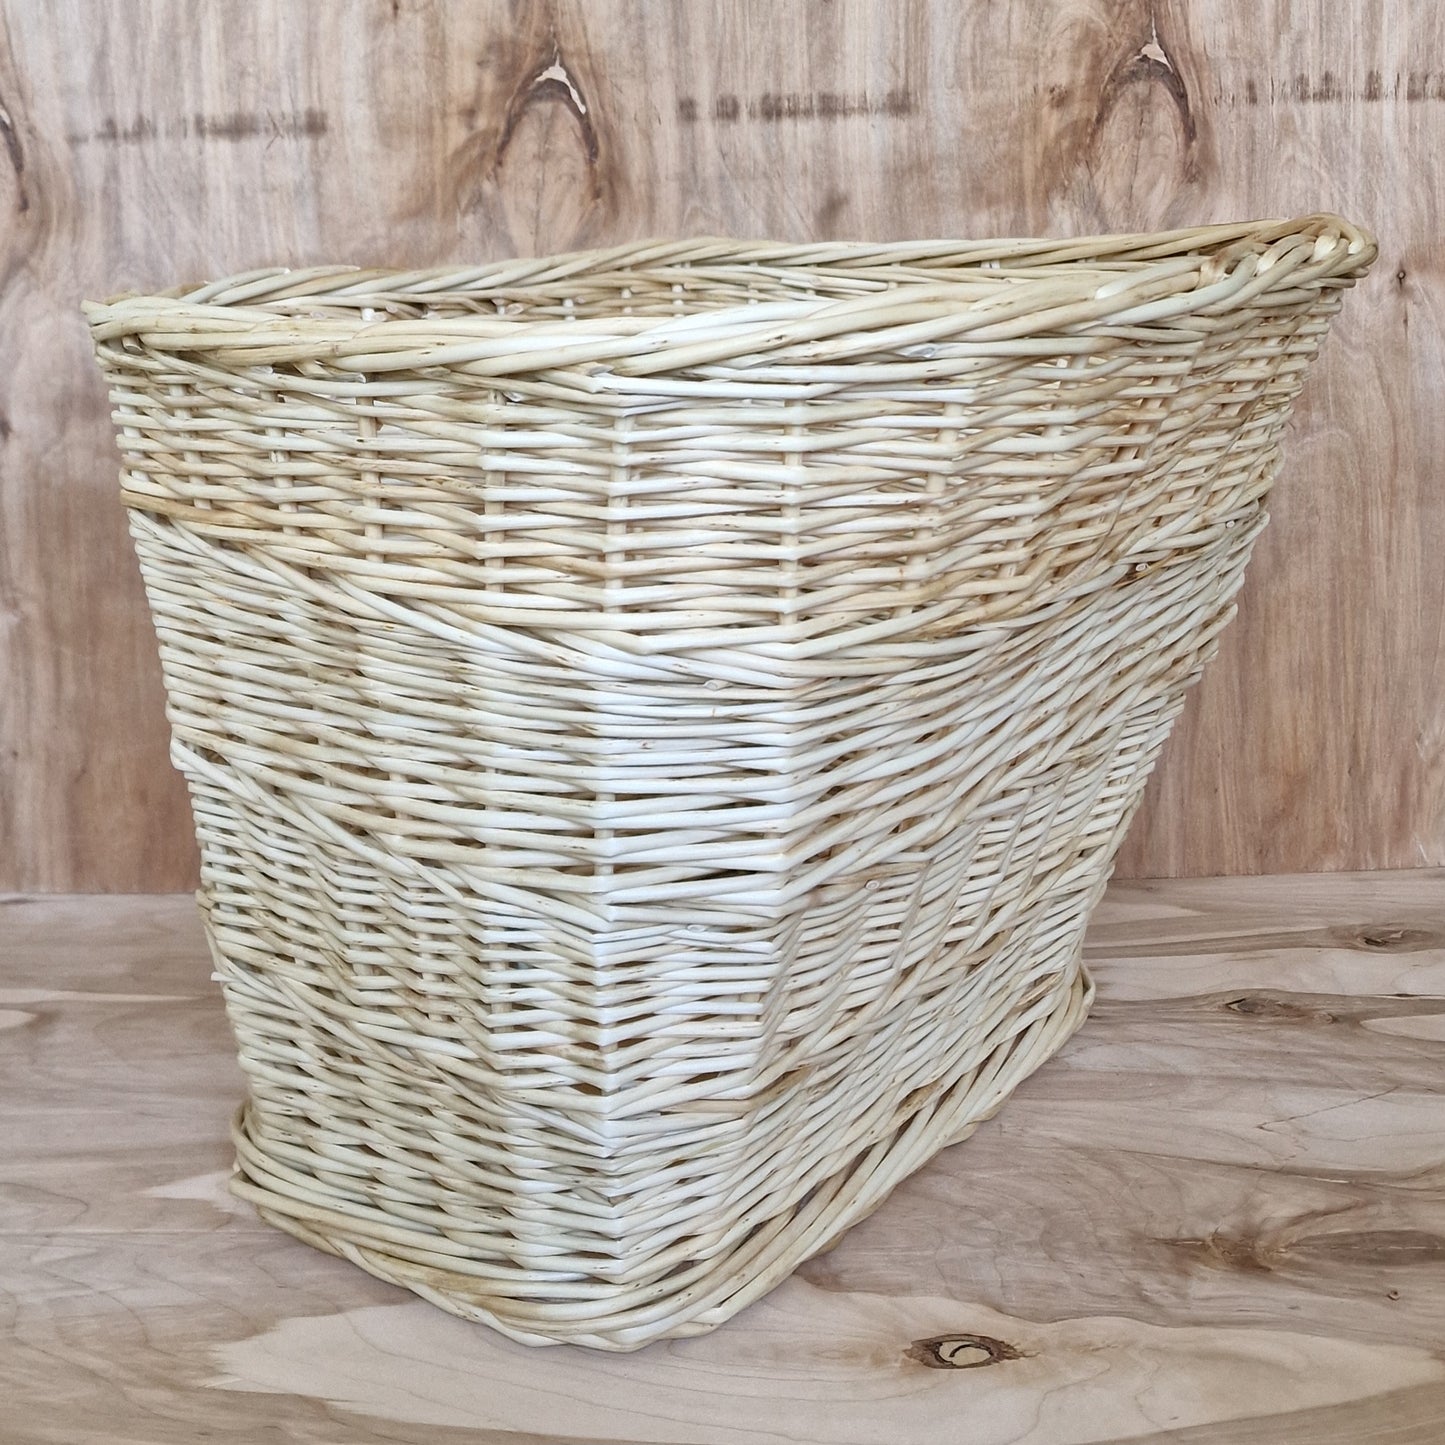 Bicycle dog basket (POSSIBLE TO ORDER)